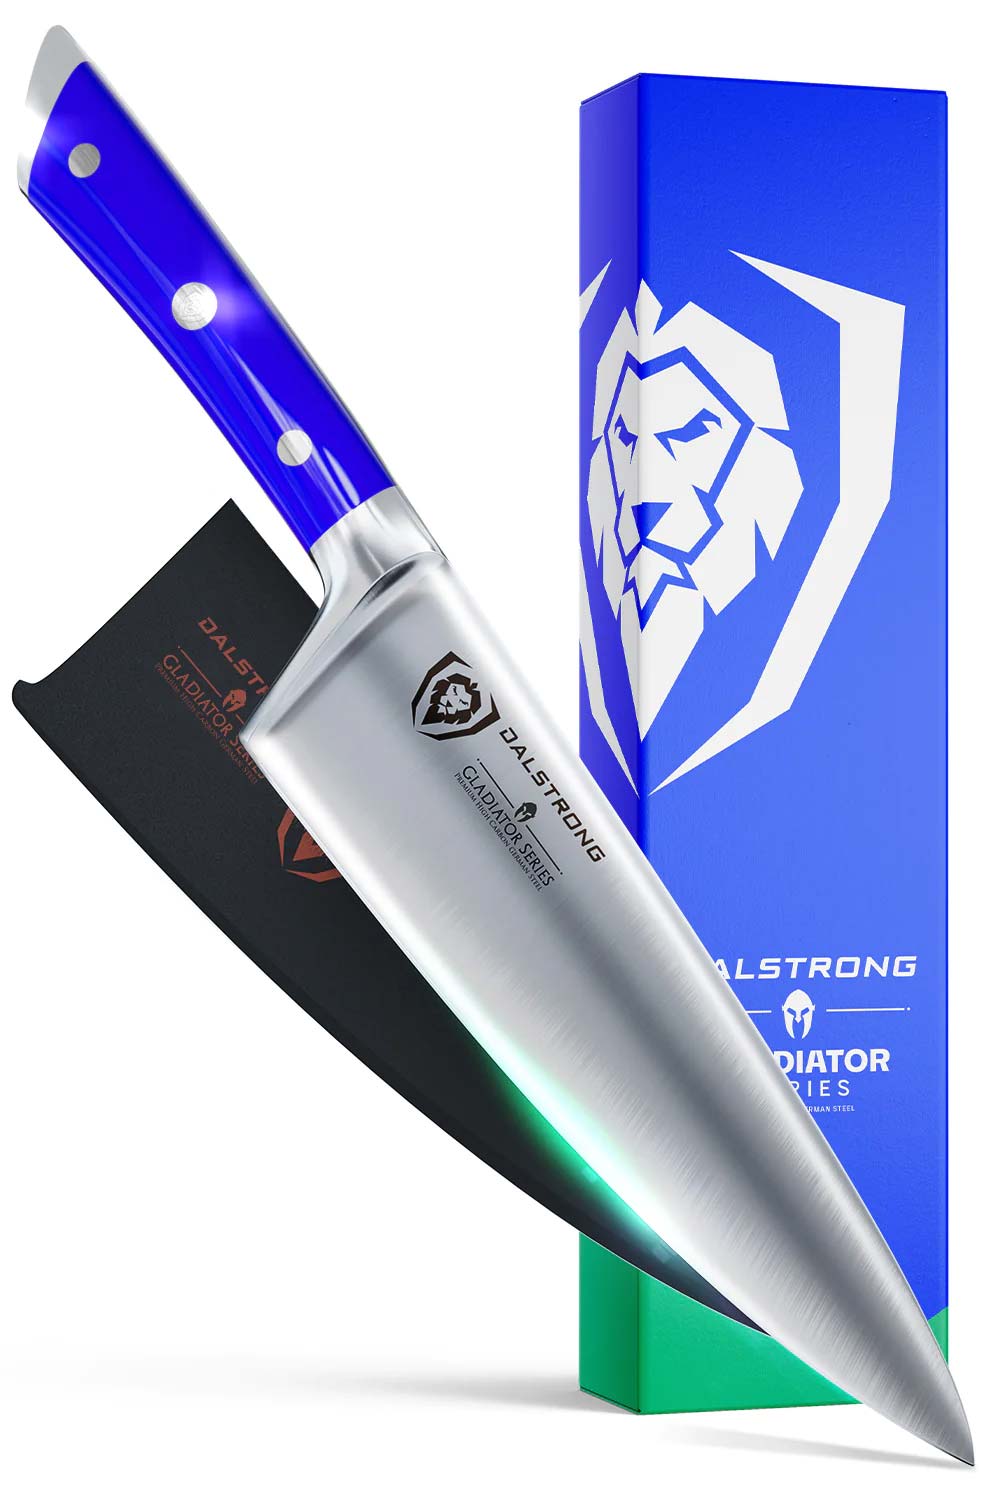 Dalstrong Chef Knife - 8 inch - Gladiator Series - Forged High Carbon German Steel - Razor Sharp Kitchen Knife - Full Tang - Blue ABS Handle - Sheath